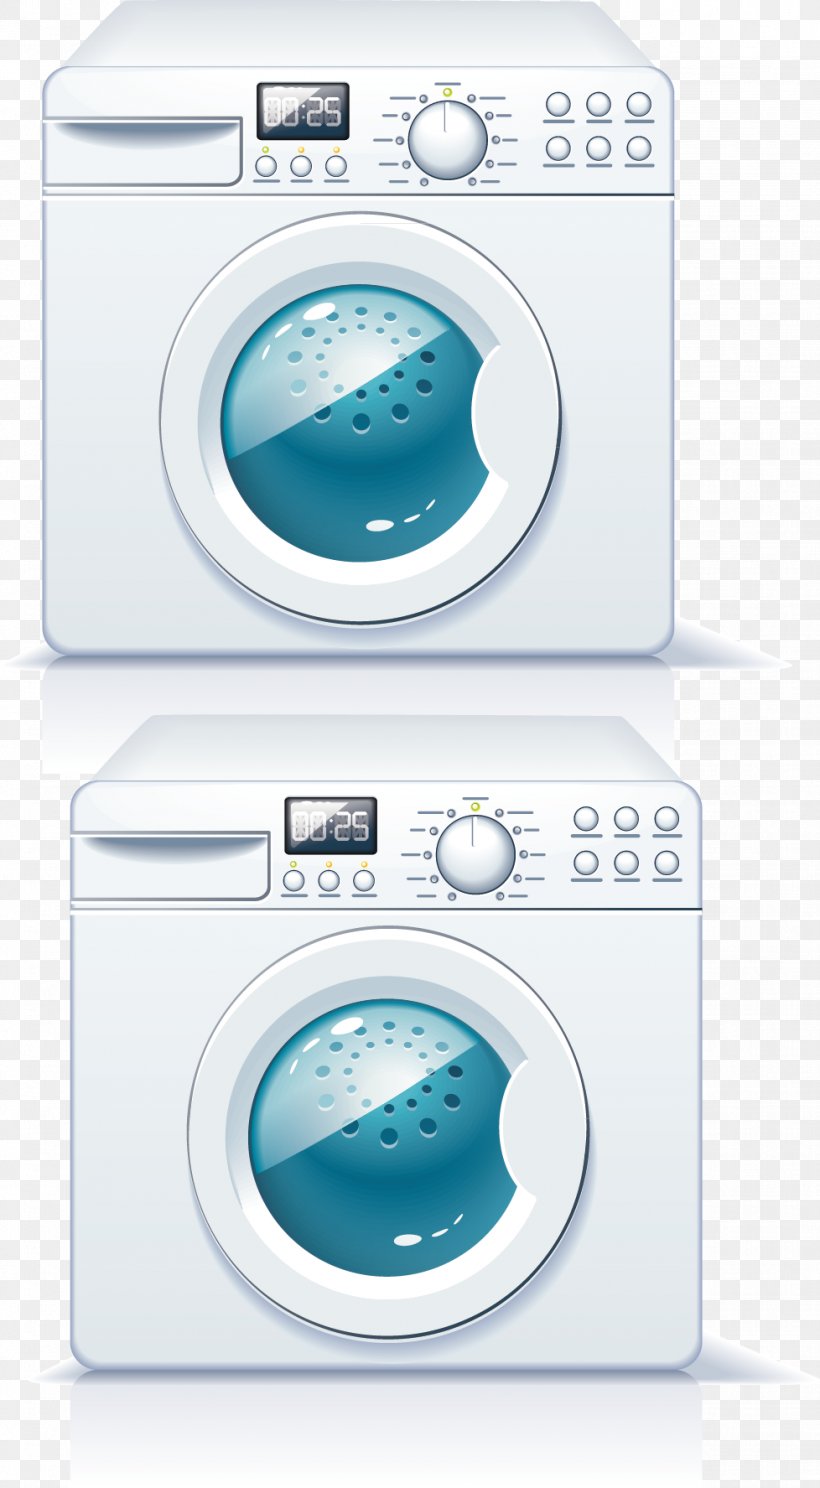 Washing Machine Clothes Dryer Laundry, PNG, 978x1775px, Washing Machine, Clothes Dryer, Flat Design, Home Appliance, Laundry Download Free